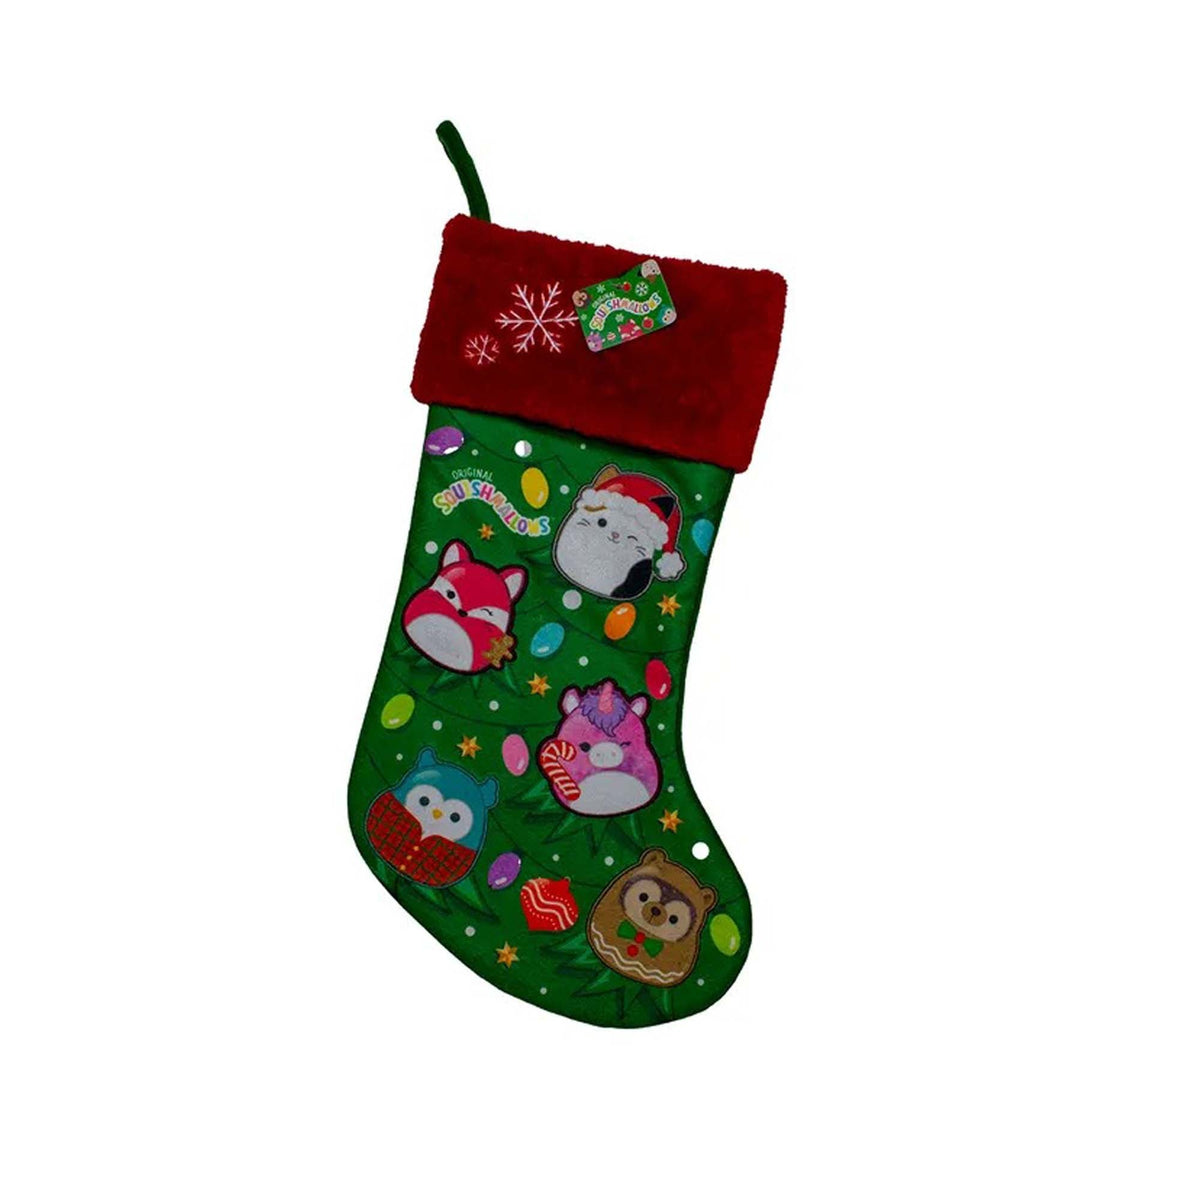 KURT S. ADLER INC Christmas Squishmallows Characters Christmas Stocking, 19 Inches, 1 Count